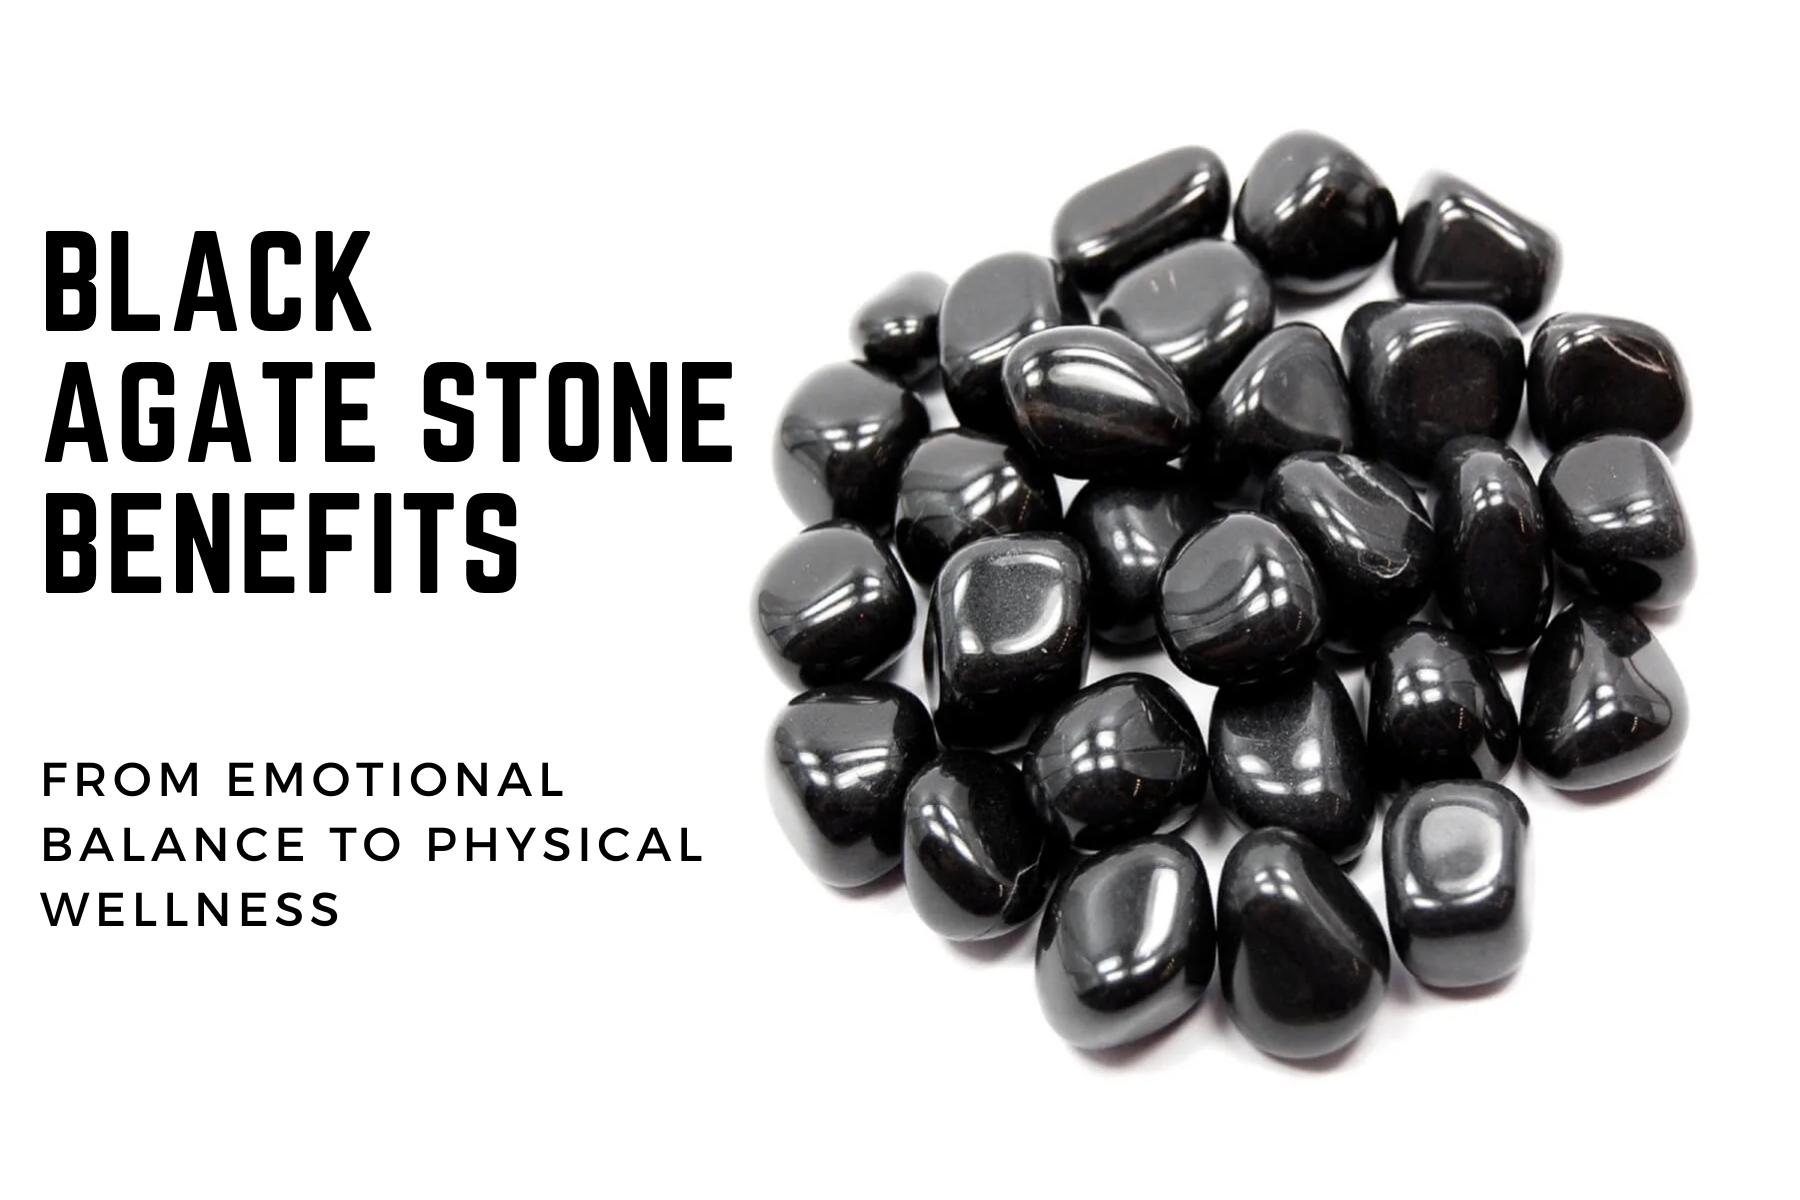 Black Agate Stone Benefits - From Emotional Balance To Physical Wellness